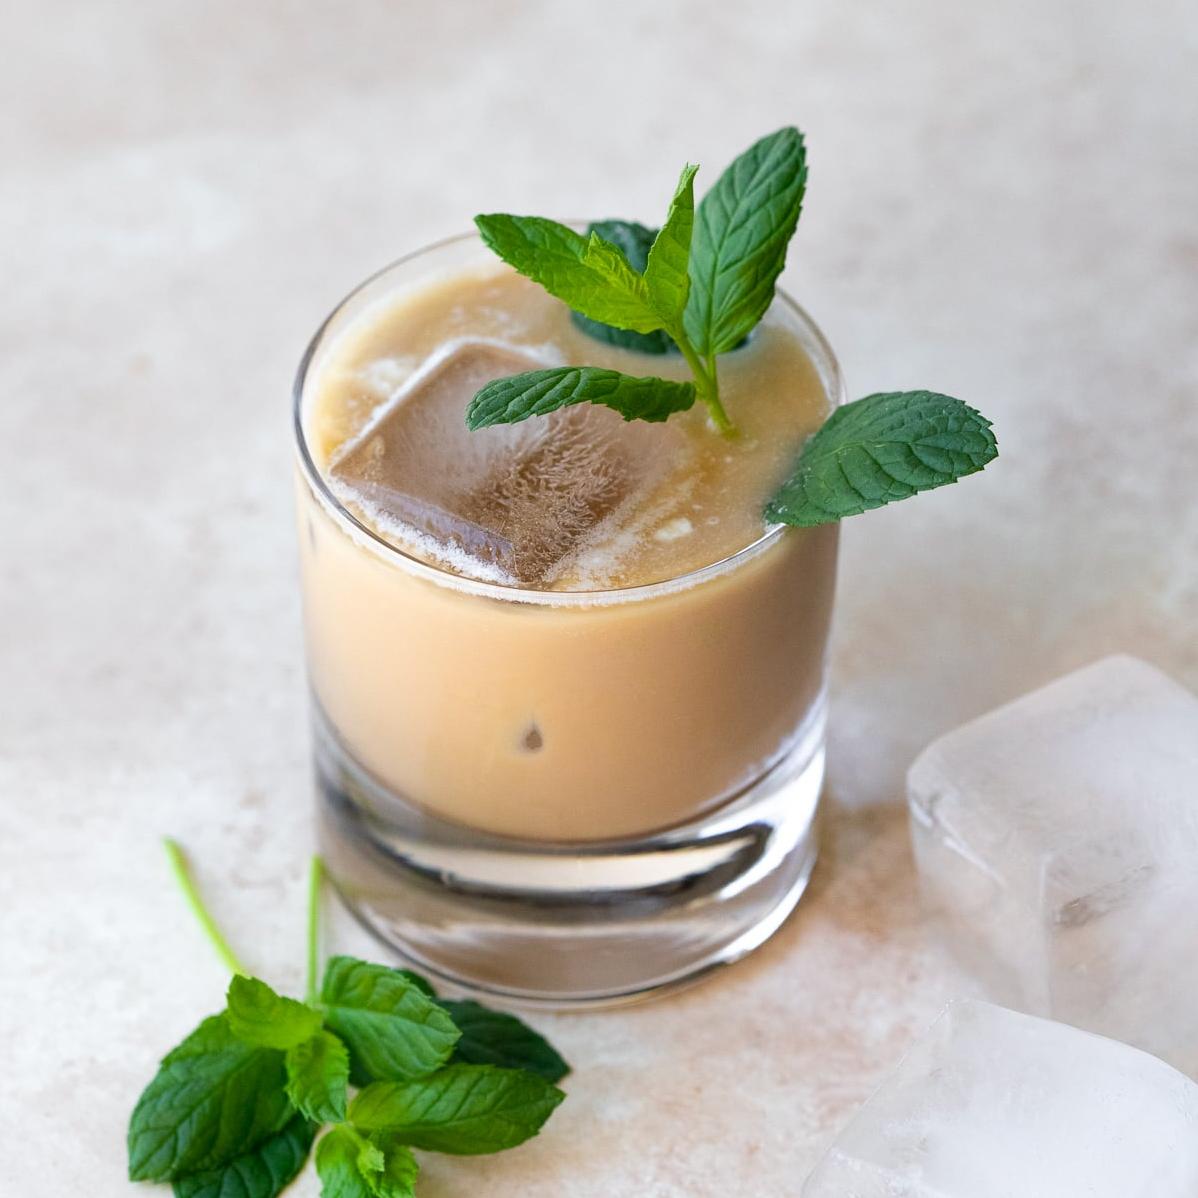  This coffee with mint is the perfect balance of sweetness and freshness.